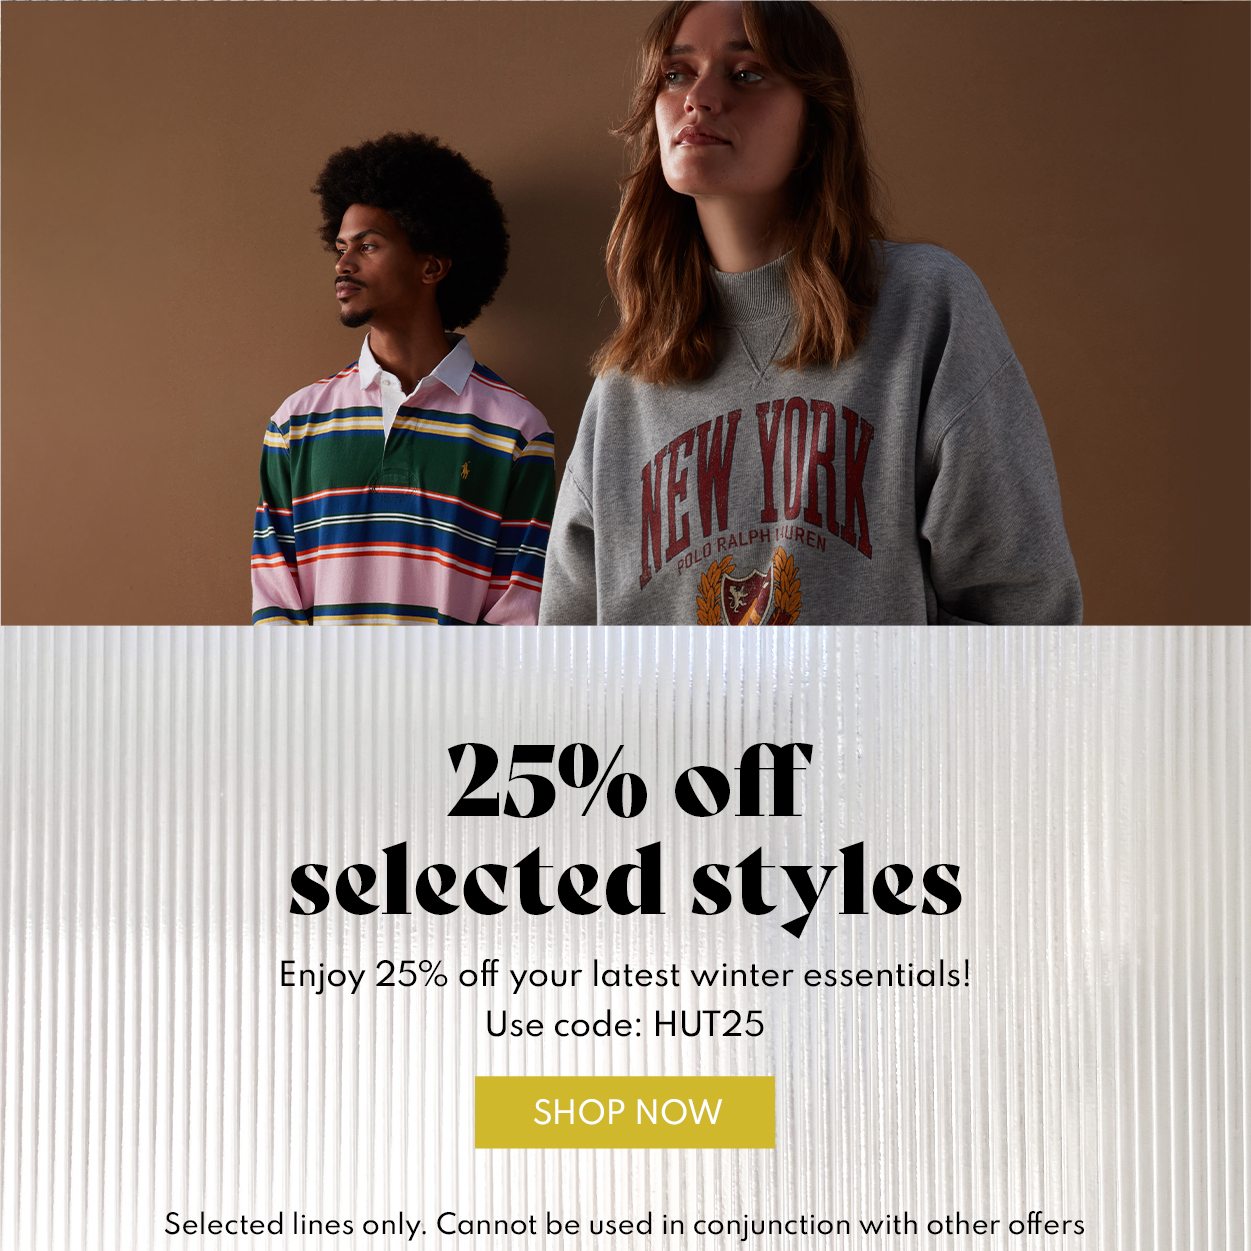 25% off selected styles